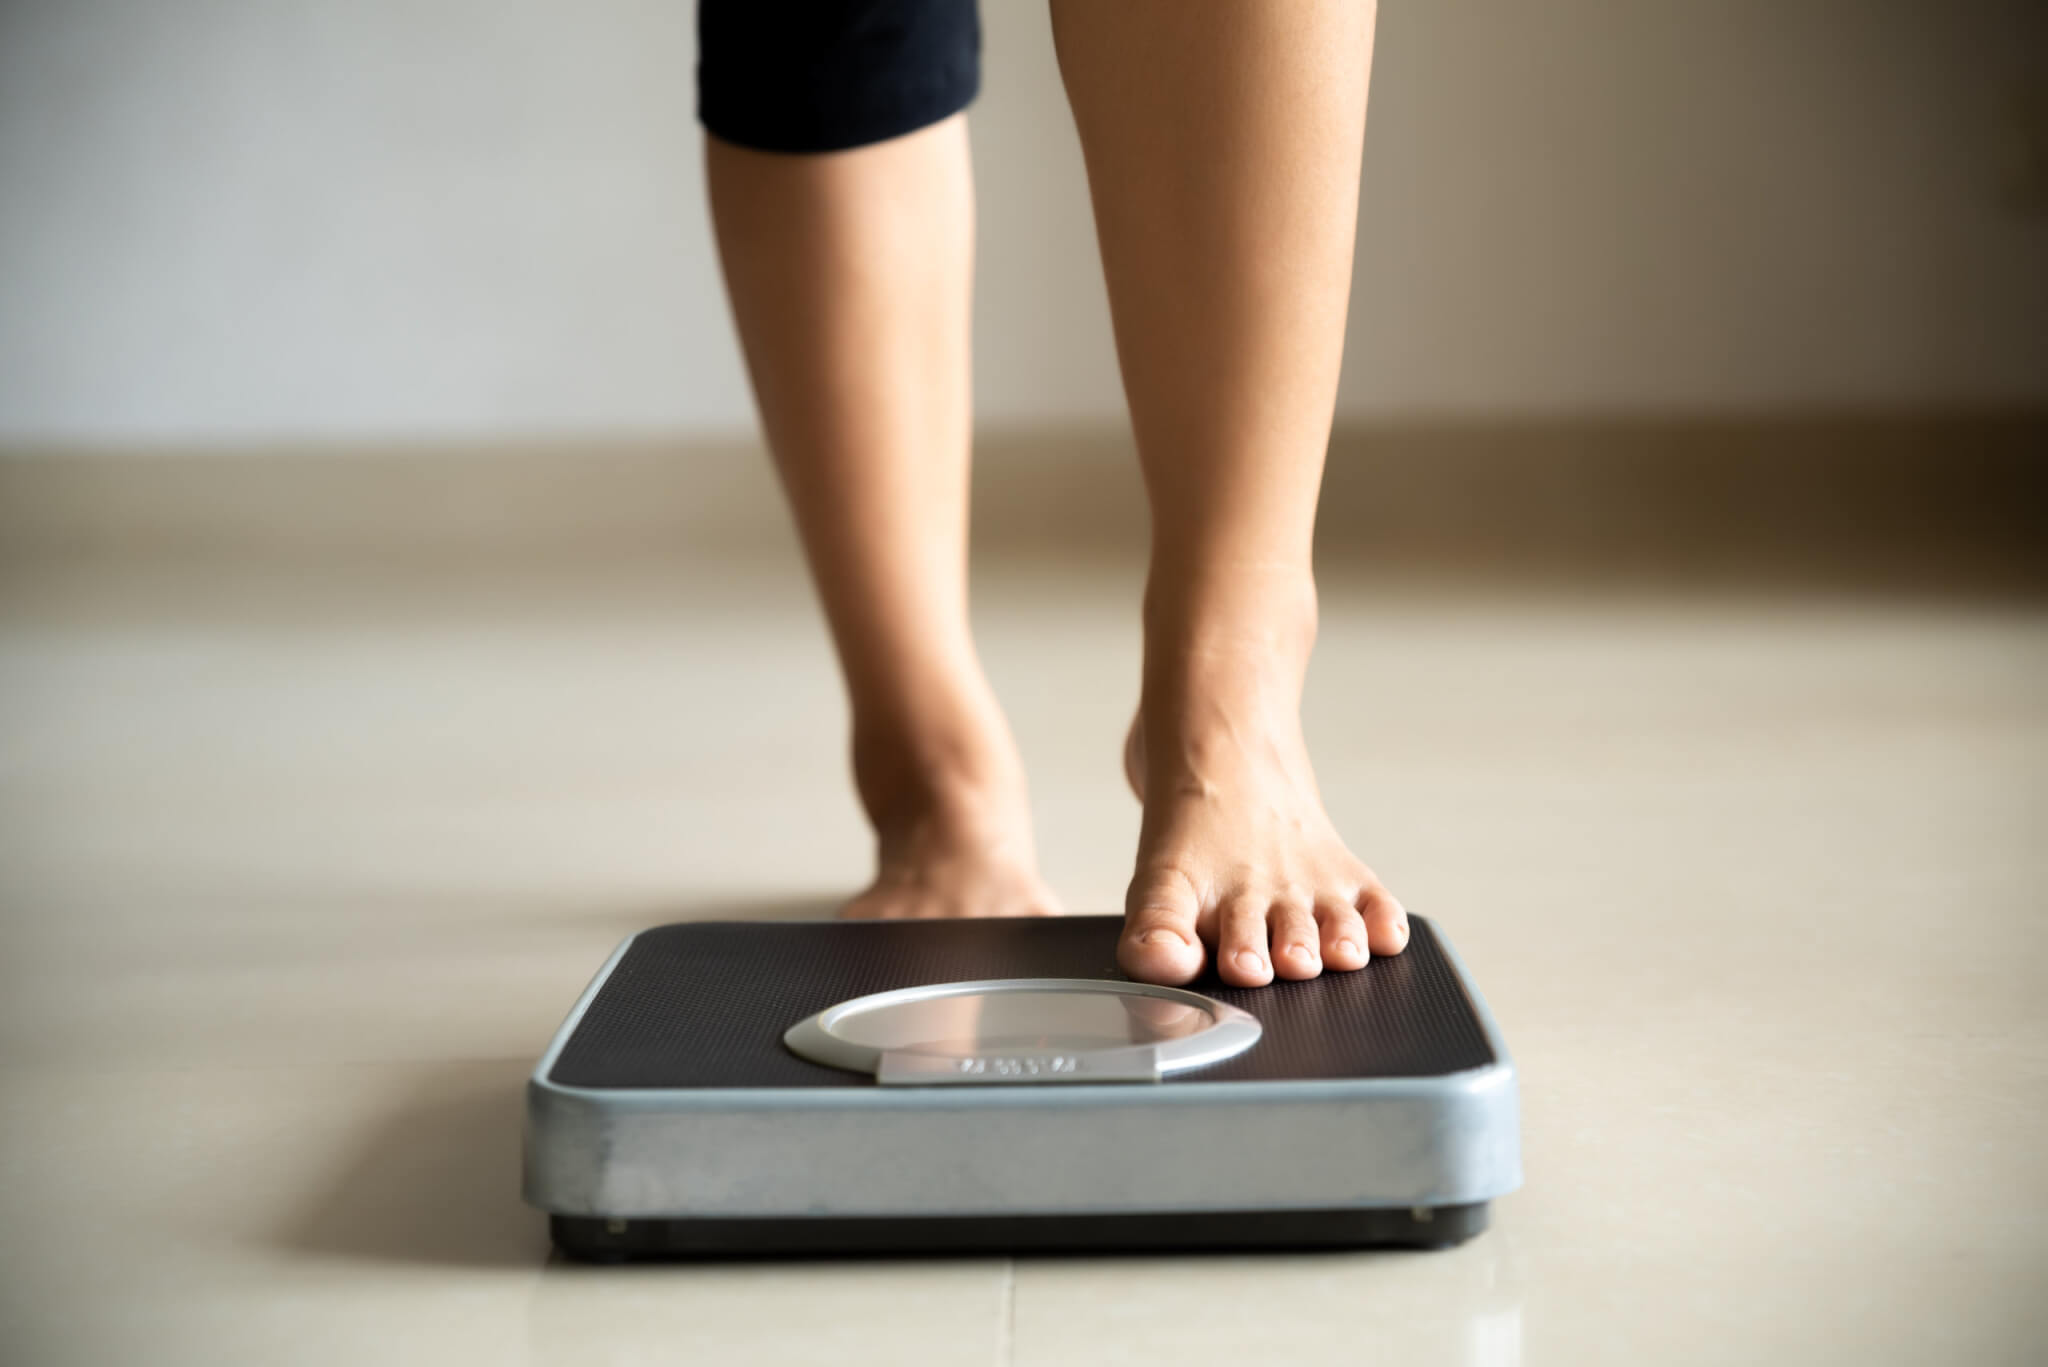 Woman stepping on scale, checking weight loss or weight gain